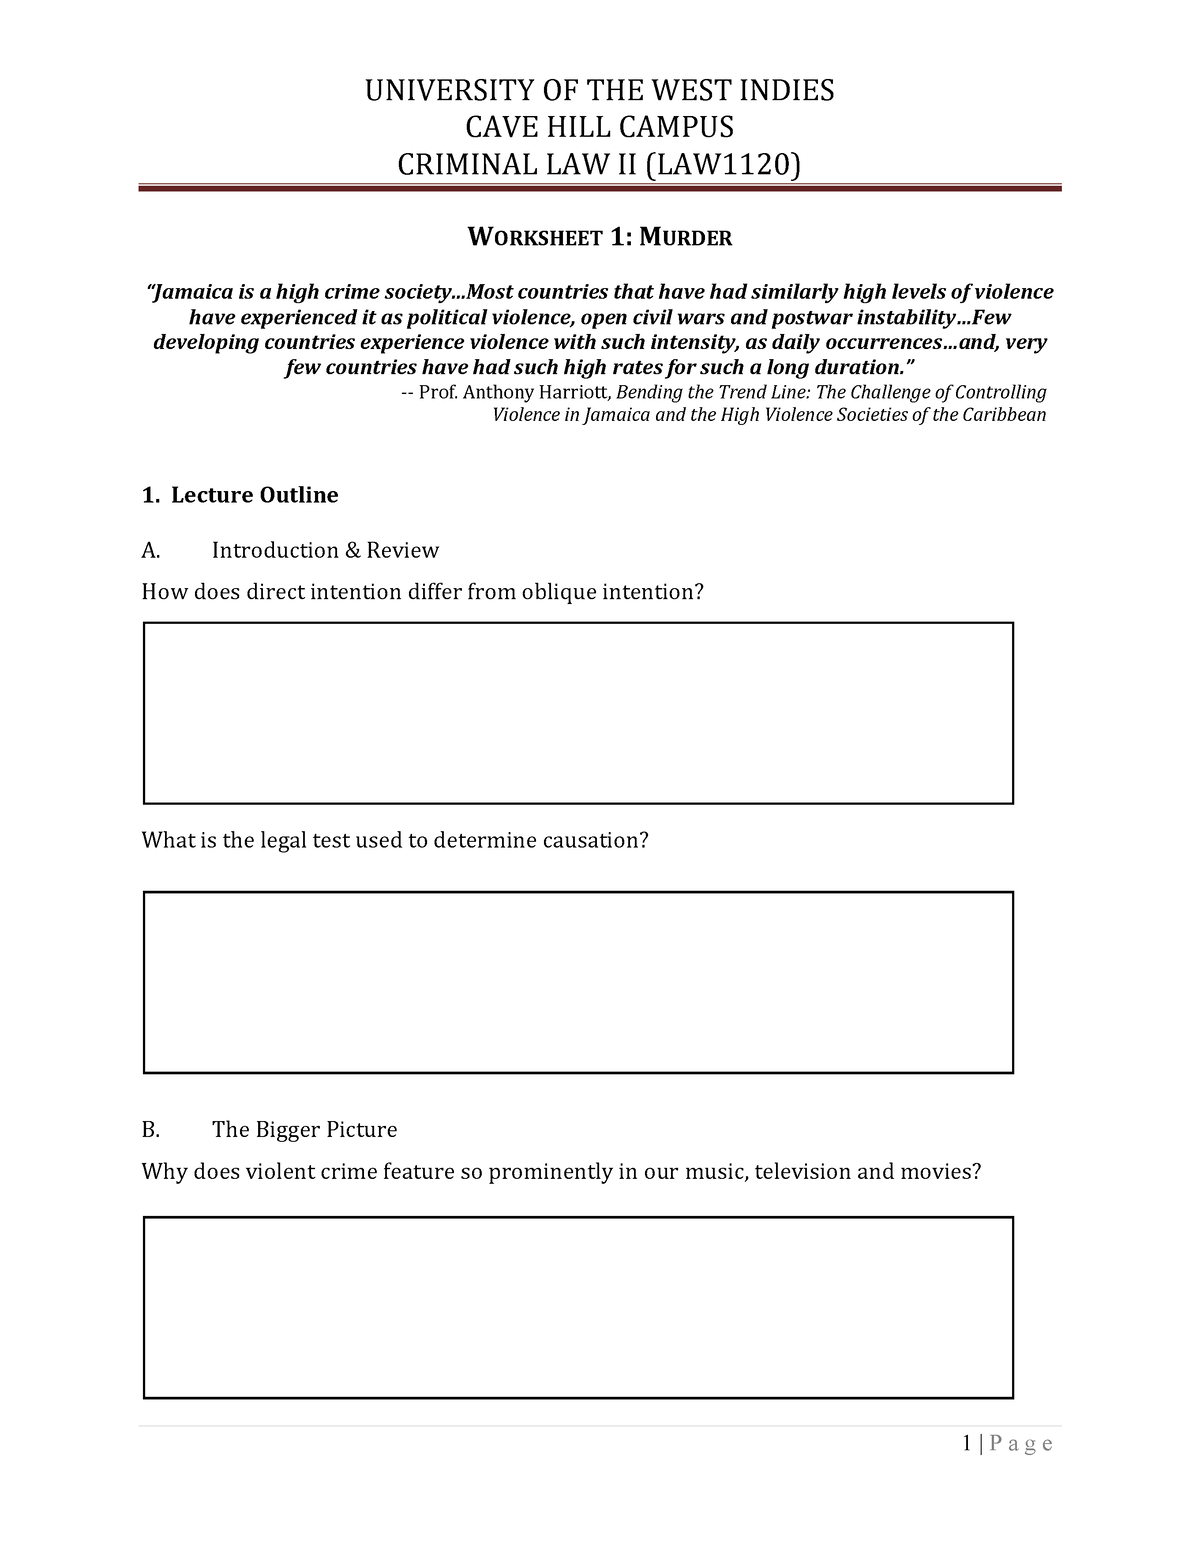 Civil And Criminal Law Worksheet Answers